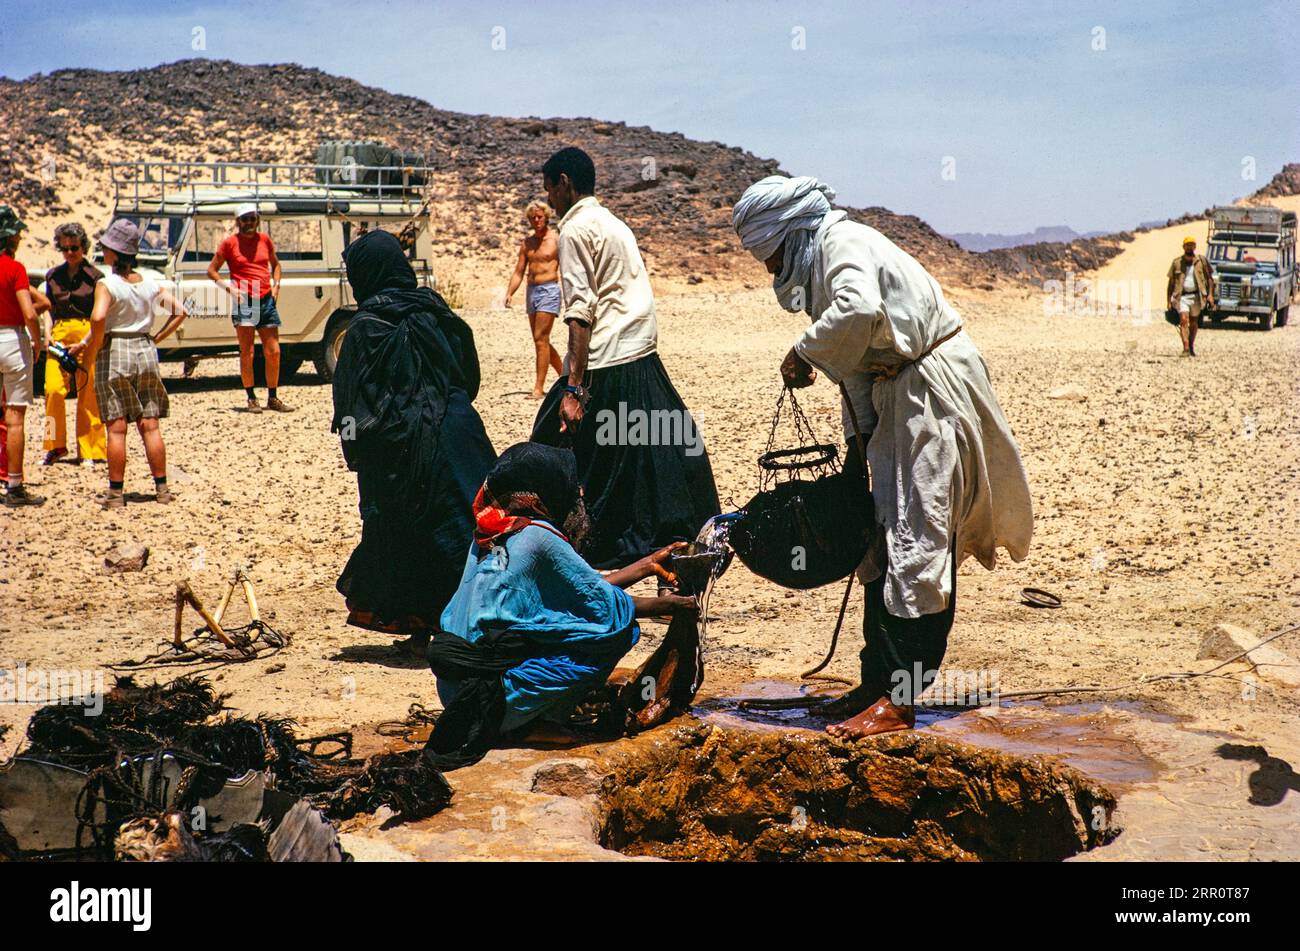 Nomads drawing water from a well, Minitrek Expeditions tourist group, near Djanet, Algeria, North Africa 1973 Stock Photo